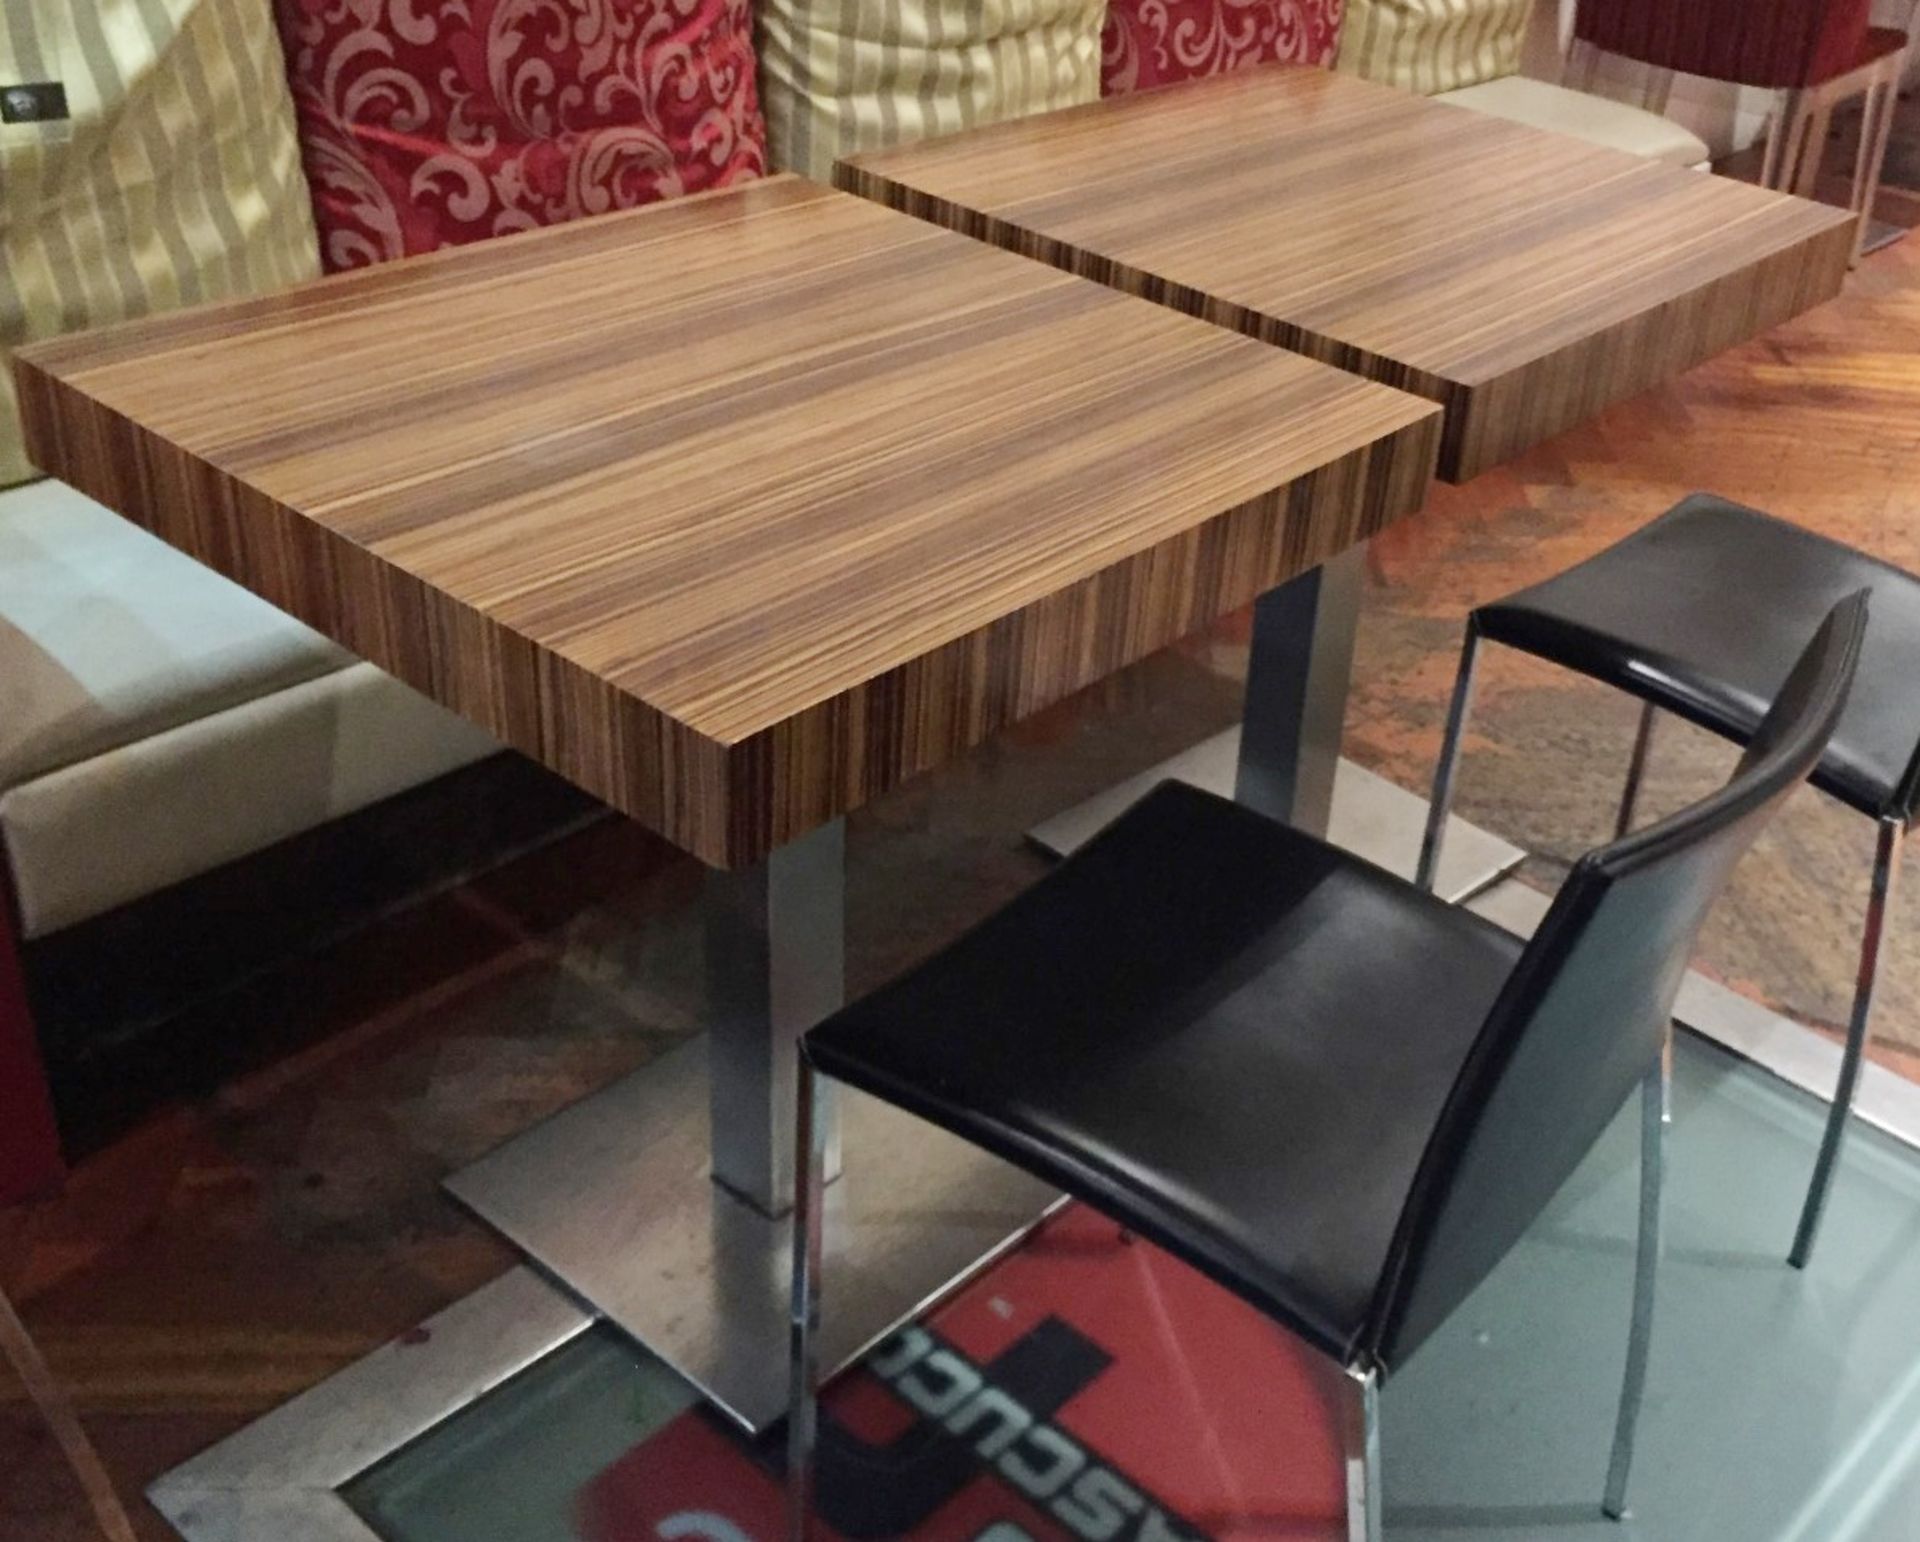 2 x Modern Zebrawood Bistro Tables - Substantial Chrome Base With Zebrawood Tops - H76 x W70 x D70cm